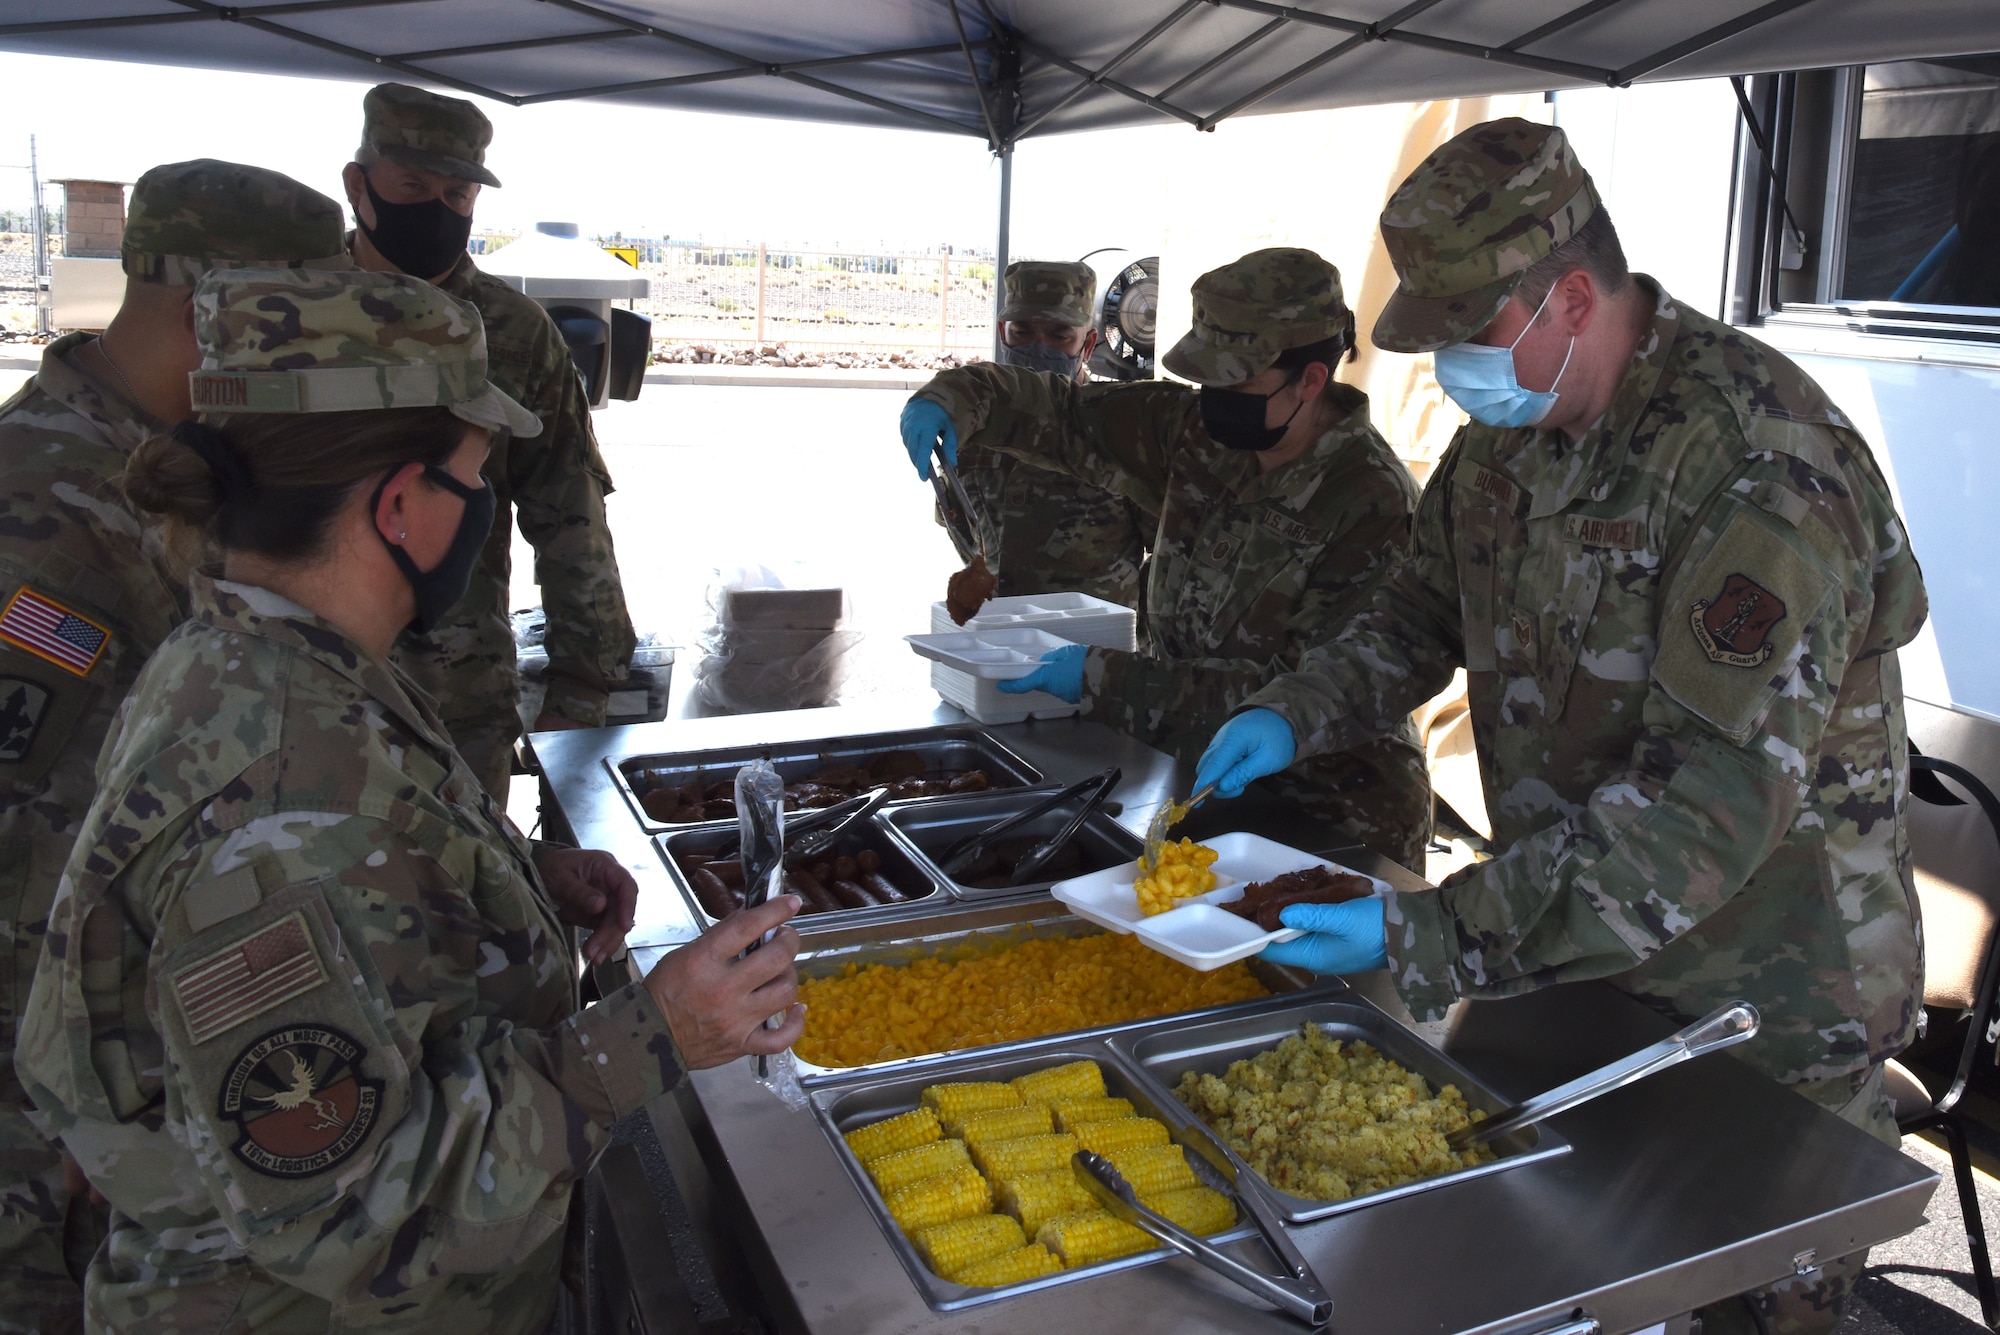 Airmen from 161st Services Squadron, Arizona Air National Guard, serve their first meal cooked in the DRMKT to Arizona Guard leadership, Aug 3, 2021, Goldwater Air National Guard Base, Arizona.  The distinguished guests were first given a brief on the DRMKT capabilities, followed by a quick tour of the trailer in its operational configuration.(U.S. Air Force photo by Tech. Sgt. Anthony Reynolds)